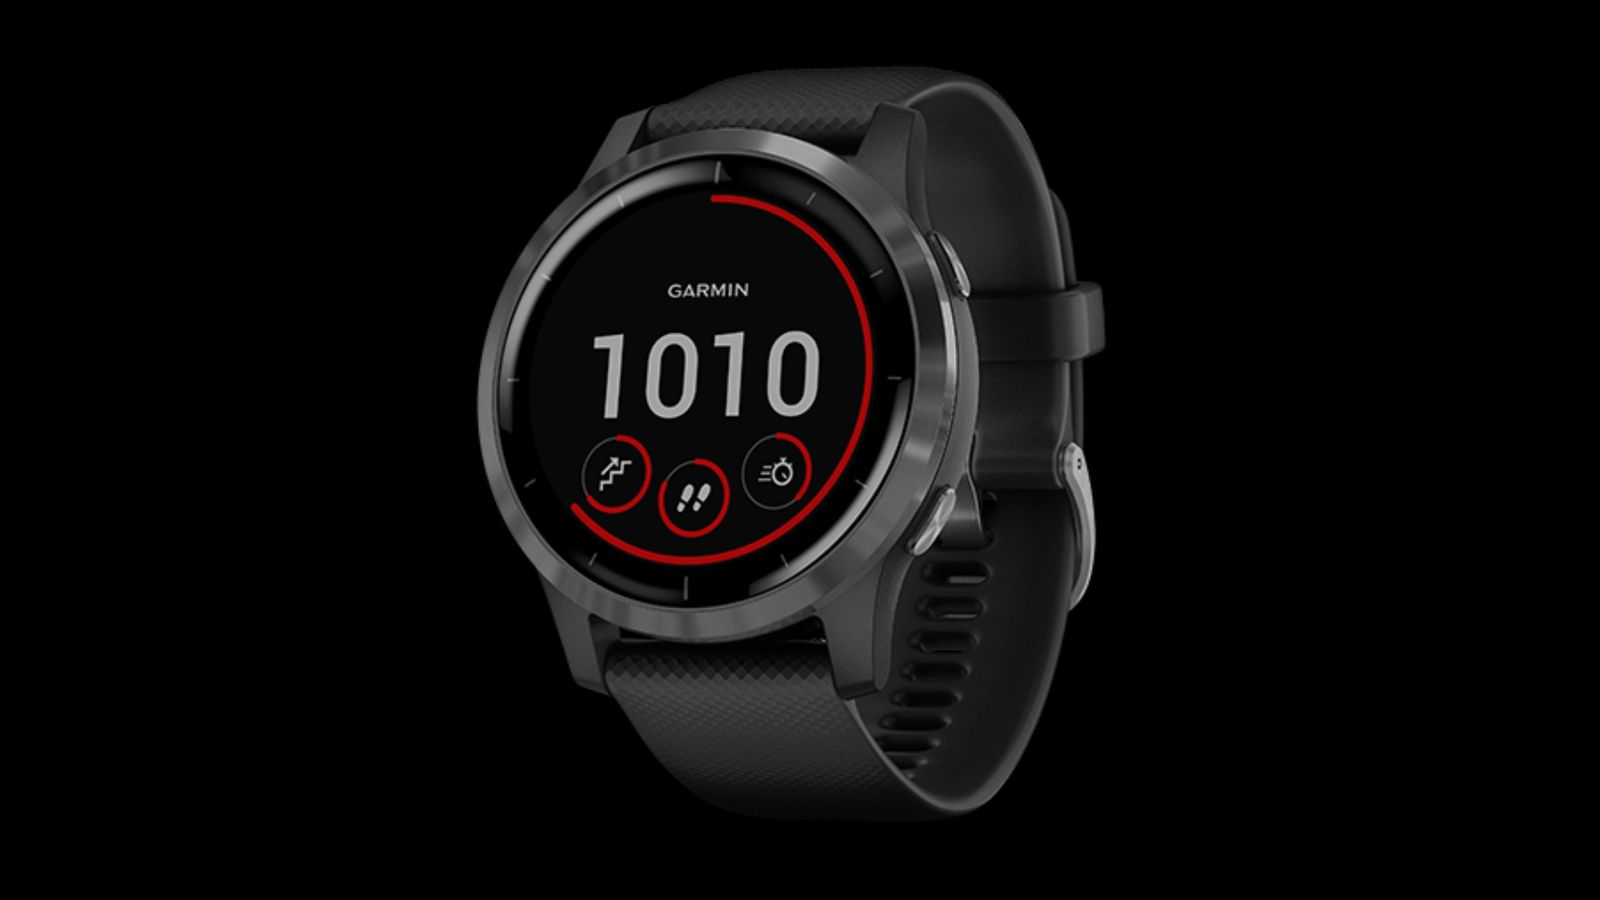 Garmin vívoactive 4 product image of stainless steel watch featuring a black band and red details on the display.